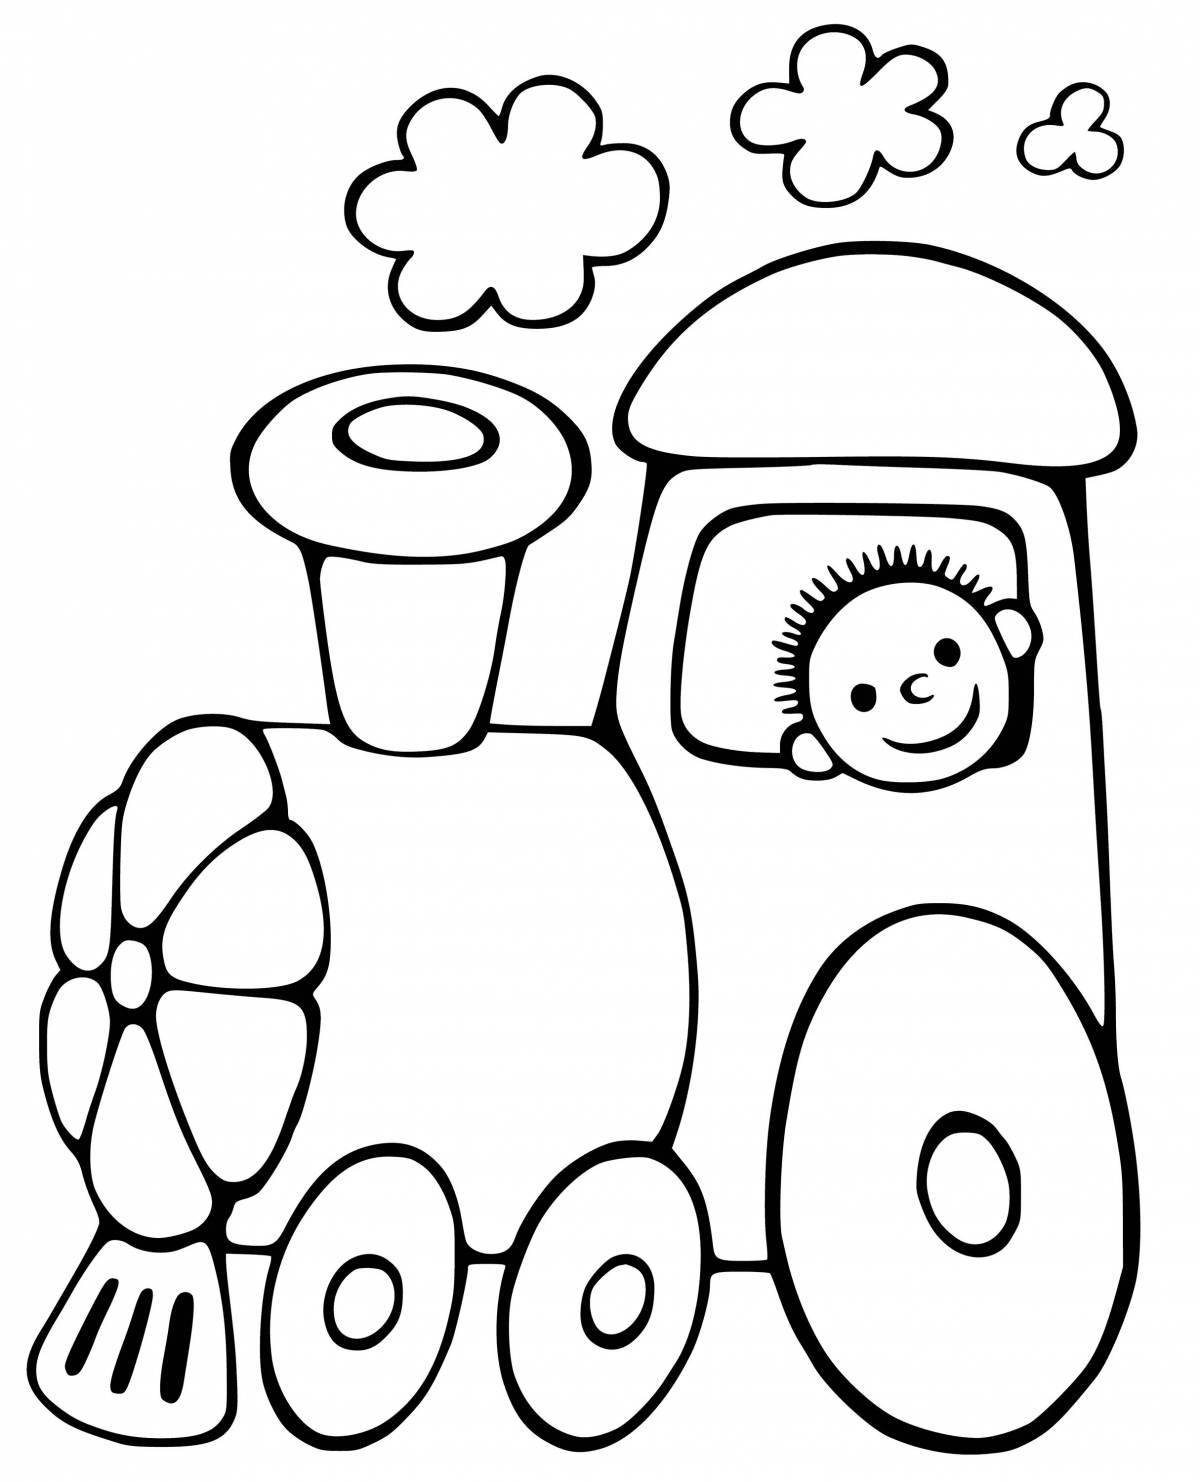 Great steam locomotive coloring pages for kids